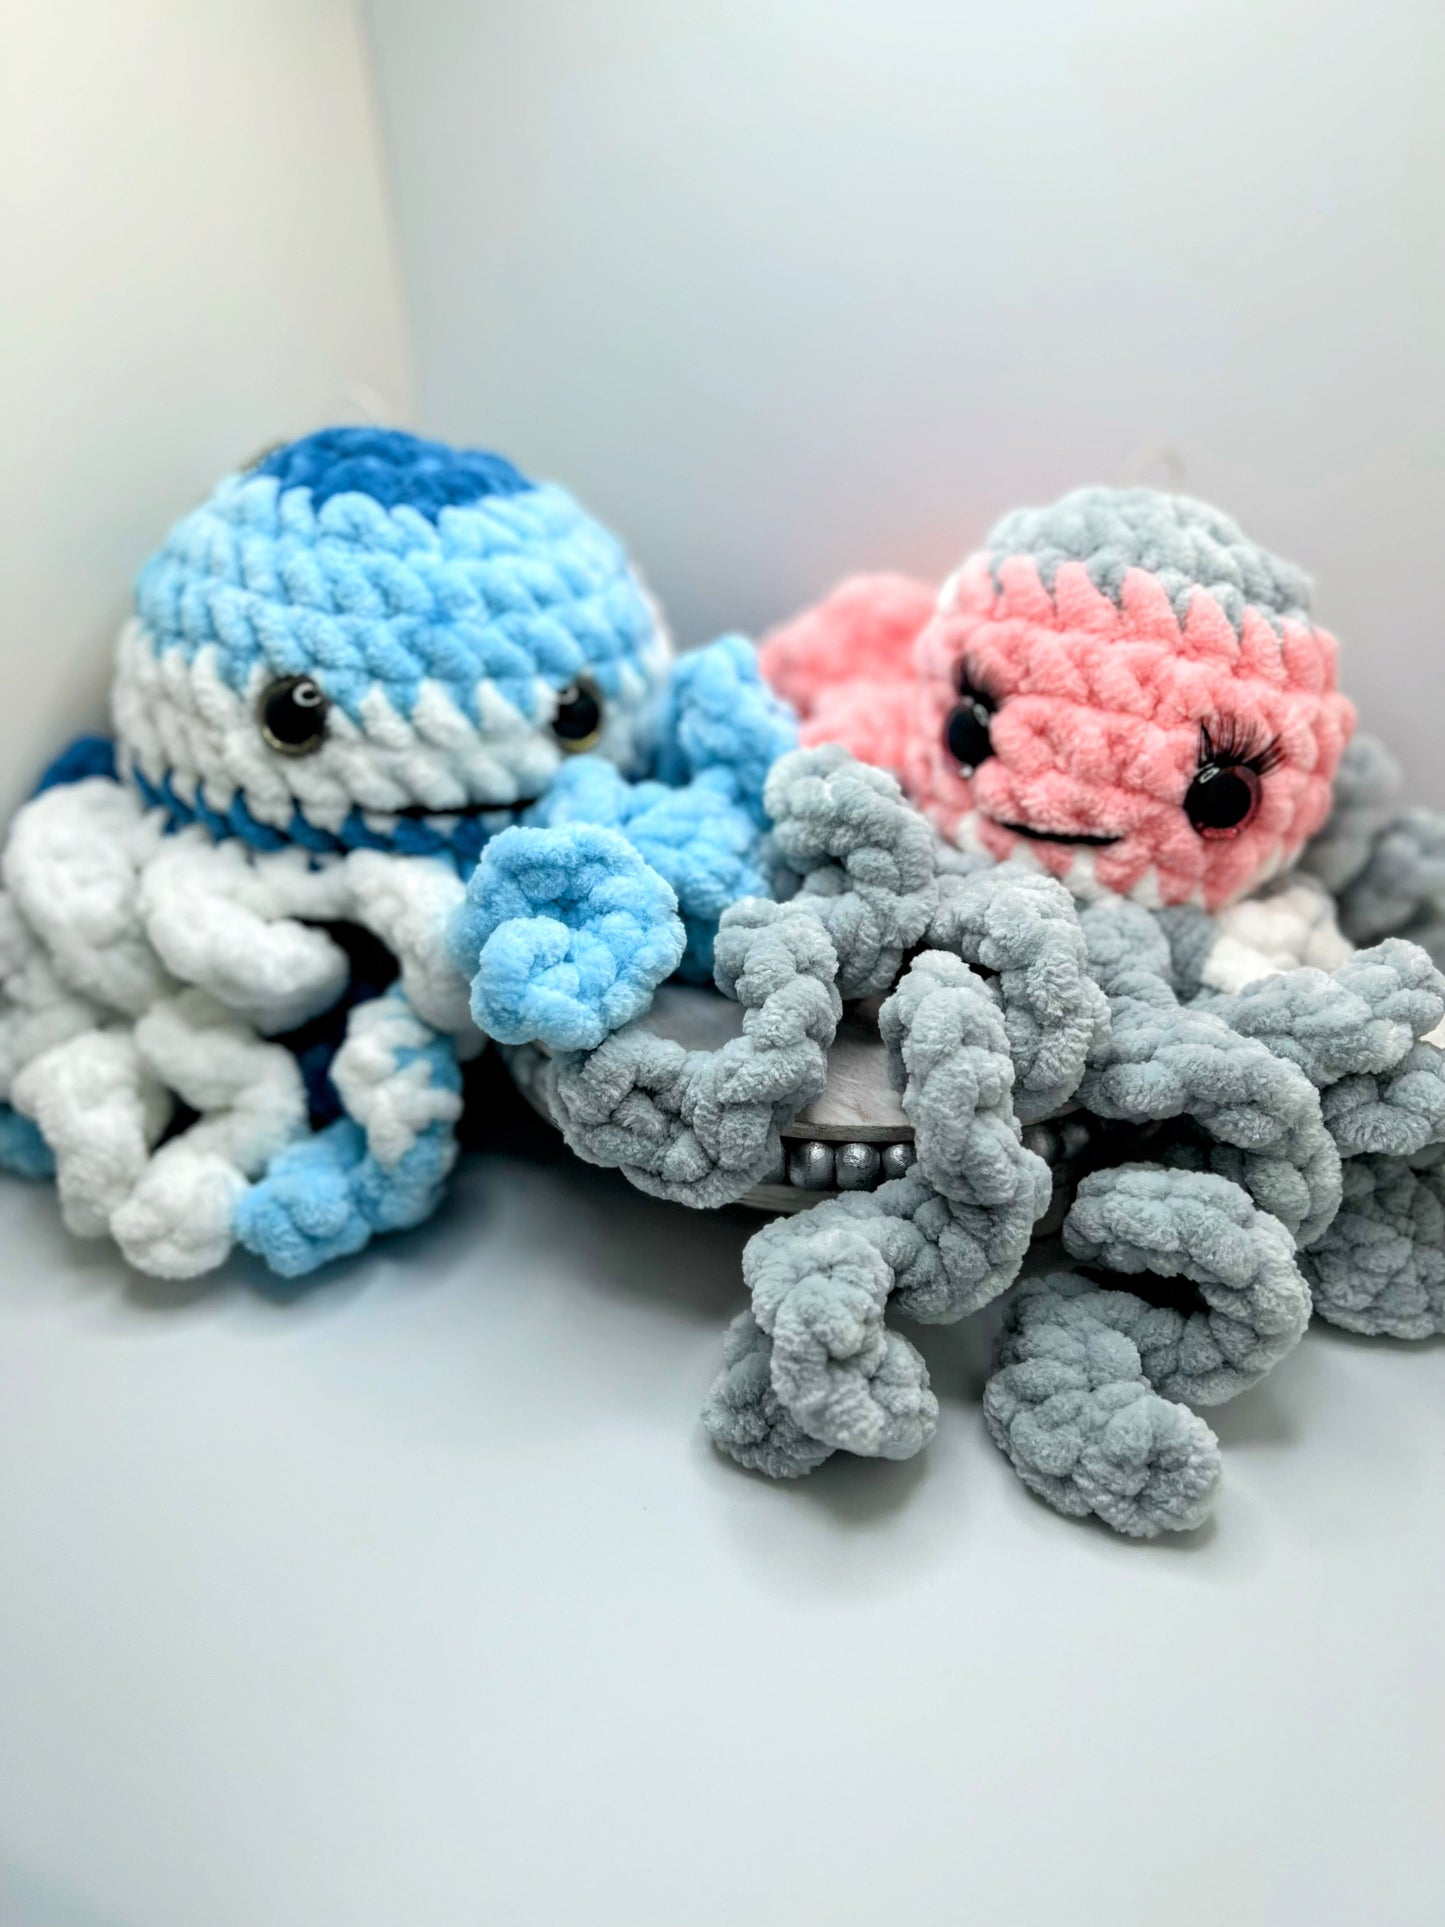 Stuffed mixed Octopus 🐙 - Crochet Knitted Amigurumi Toy- Big Keychain (Different Colors)